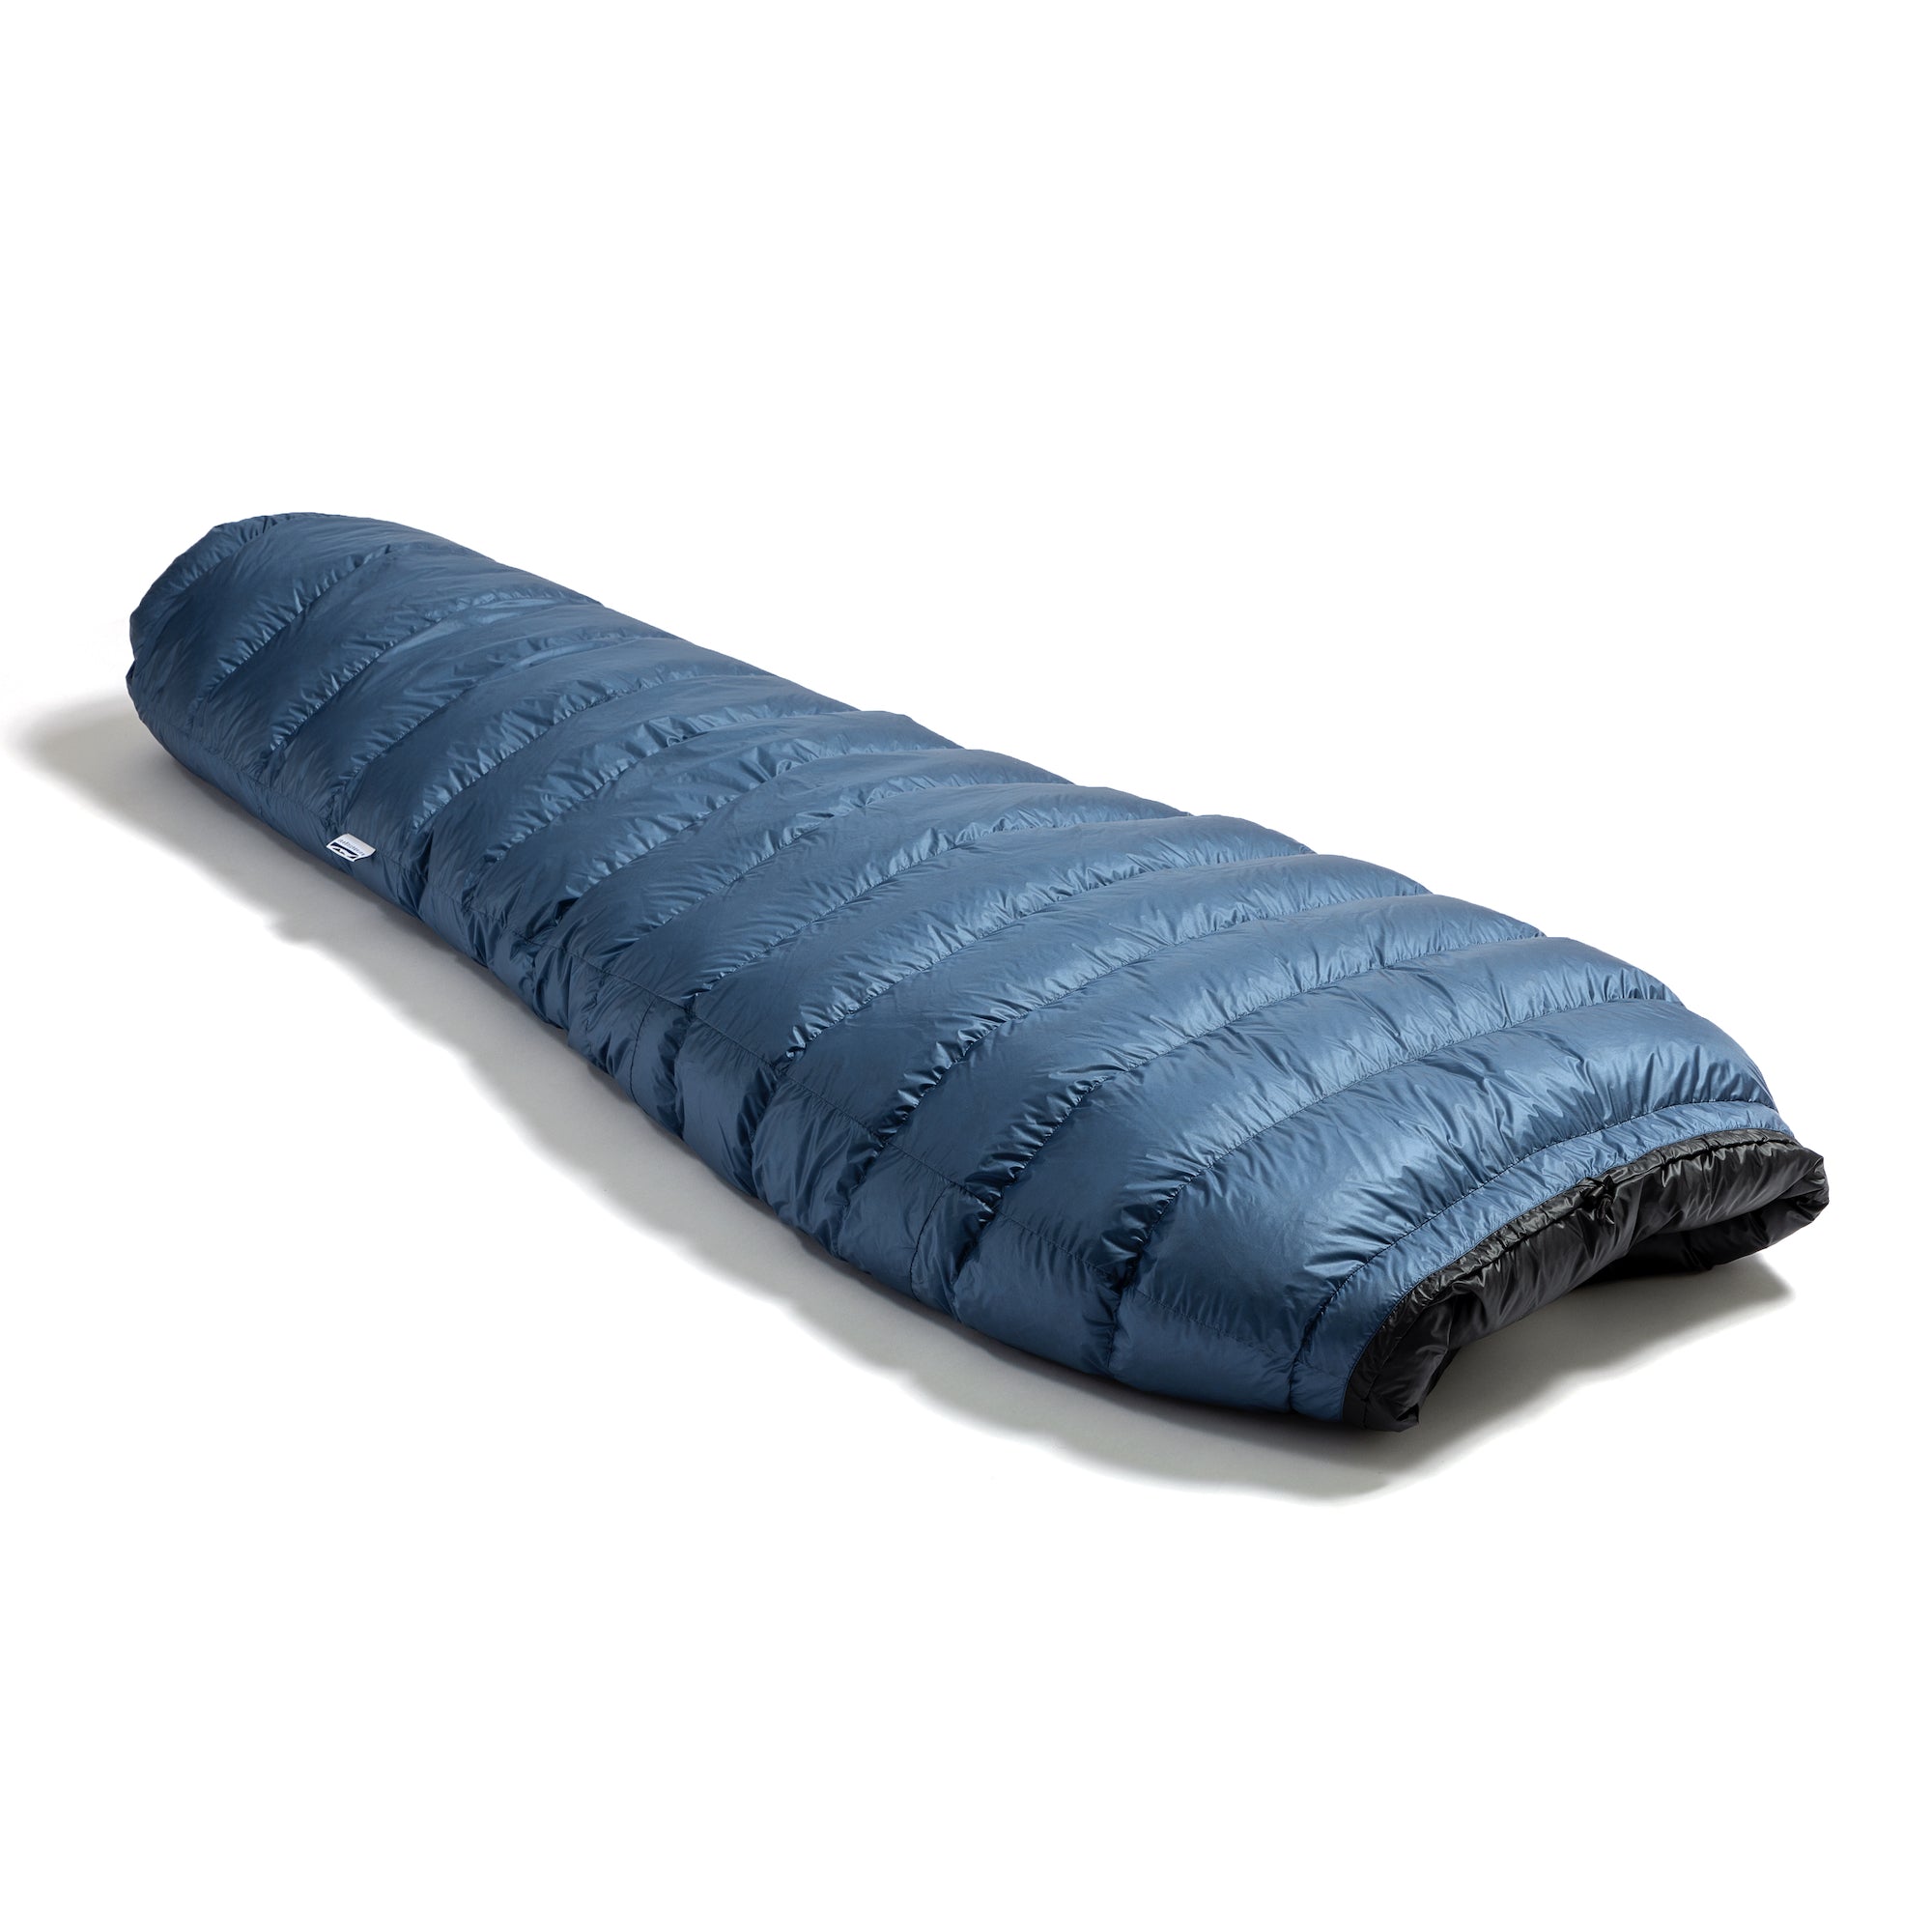 A One -30c° Cover up 100% Down F,100% Nylon Cloth, Light Weight, Warm &  Cold Weather Sleeping Bag | Flipkart.com